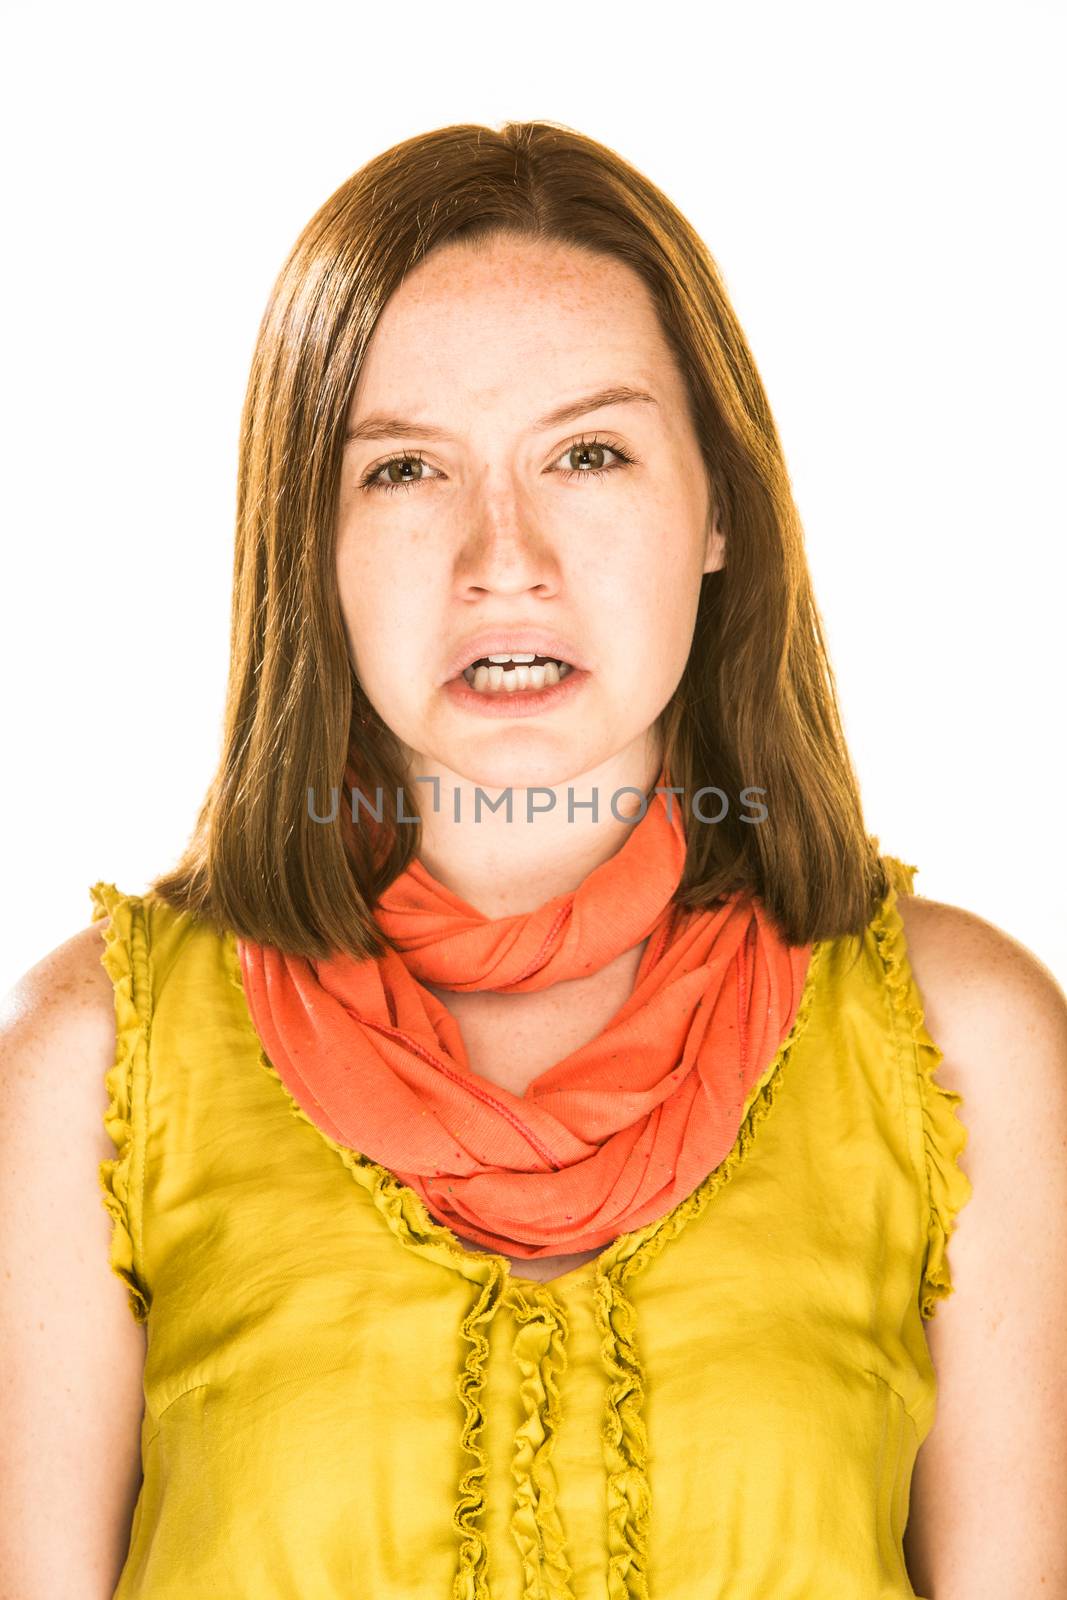 Pretty girl with a sad expression on white background